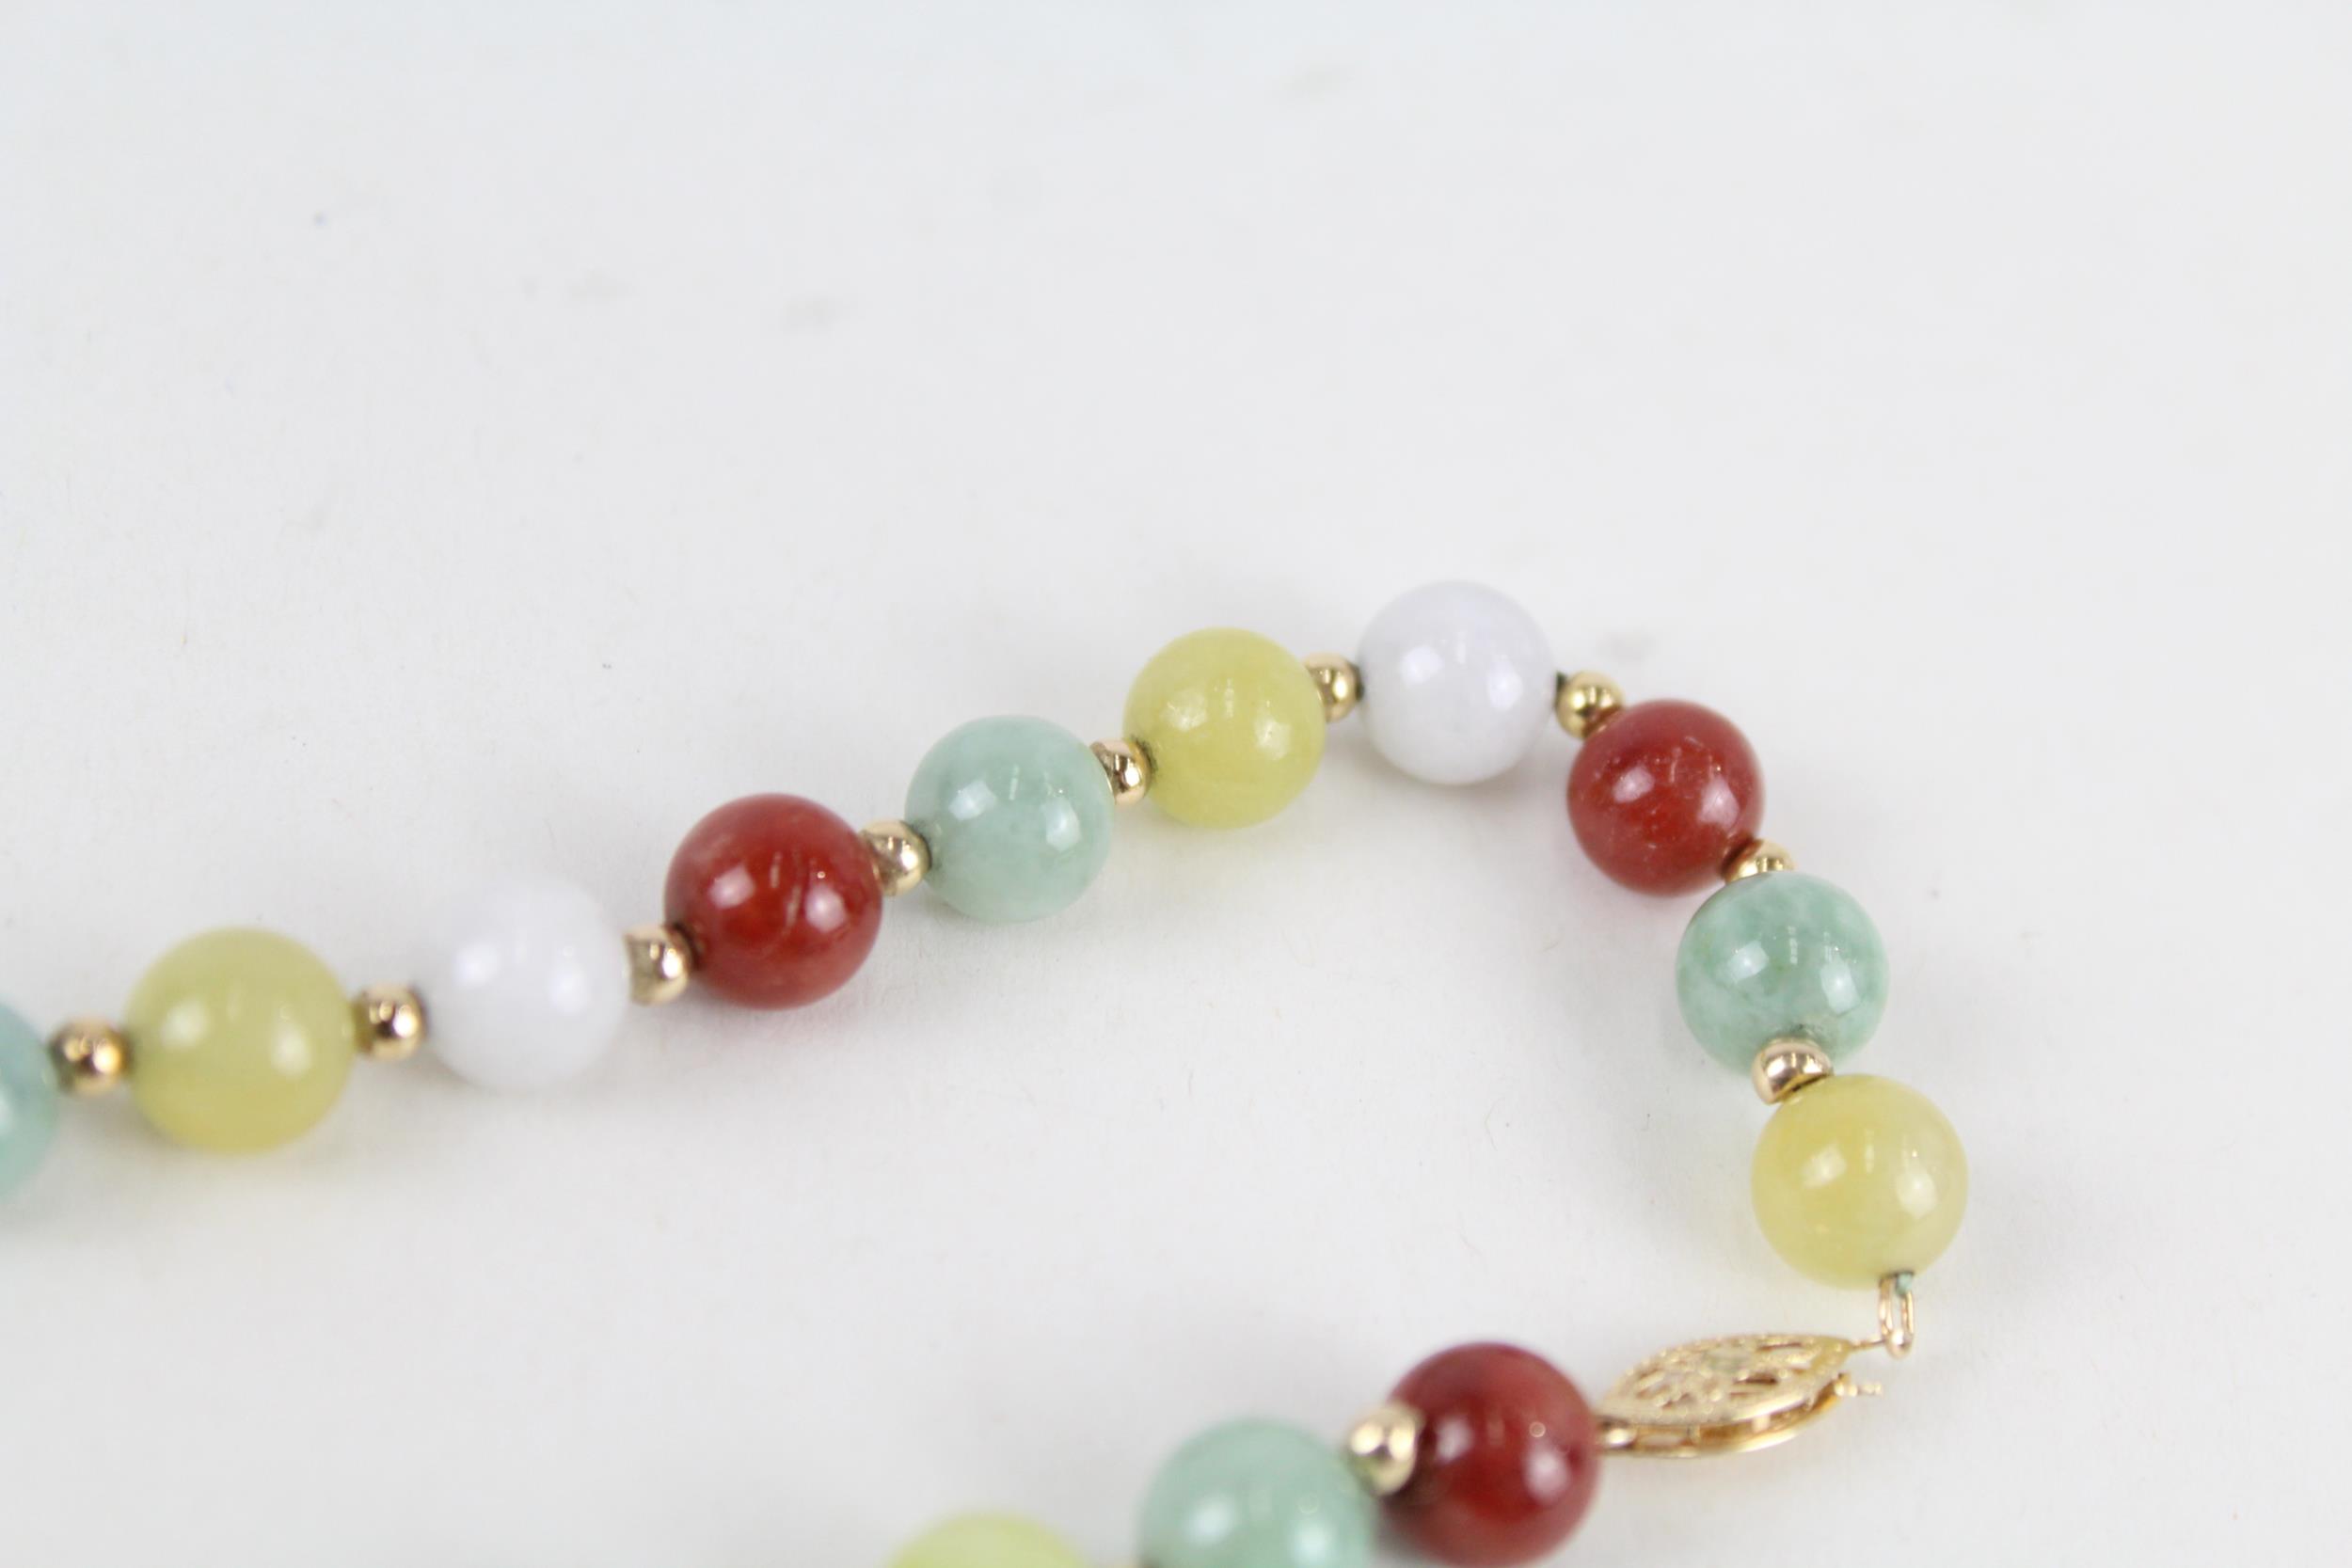 14ct gold clasp multi-colour hardstone single strand ring inc. jade with gold spacers 42.6 g - Image 5 of 5